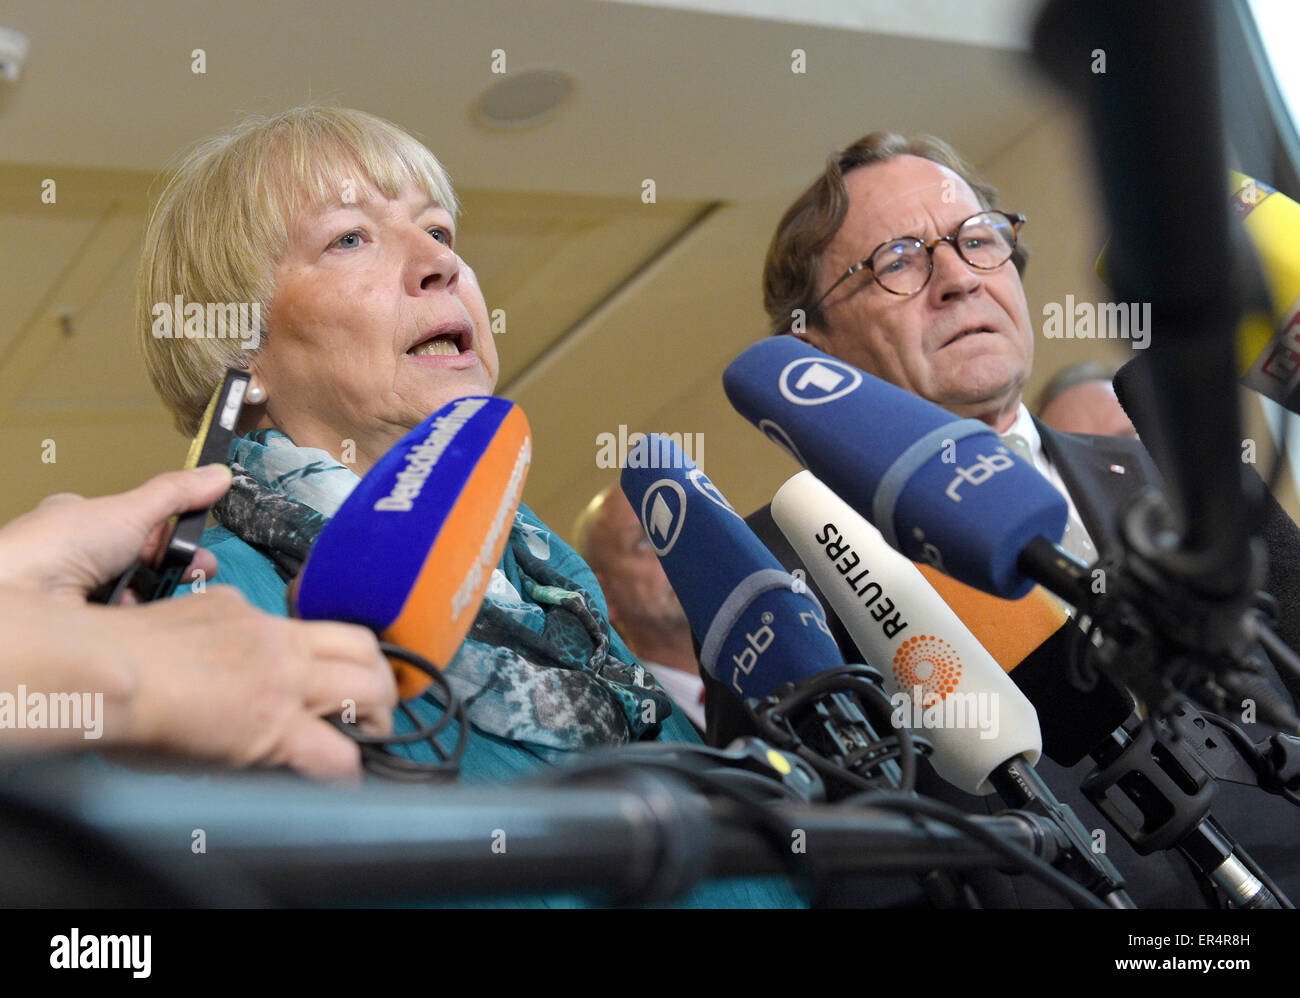 Berlin, Germany. 27th May, 2015. Deputy Chairman of the Railway and Transport Union (EVG) Regina Rusch-Ziemba (L) and Chief Human Resources Officer of Deutsche Bahn AG Ulrich Weber speak to members of the press in Berlin, Germany, 27 May 2015. Deutsche Bahn and the EVG have reached an agreement on labour provisions. Photo: Rainer Jensen/dpa/Alamy Live News Stock Photo